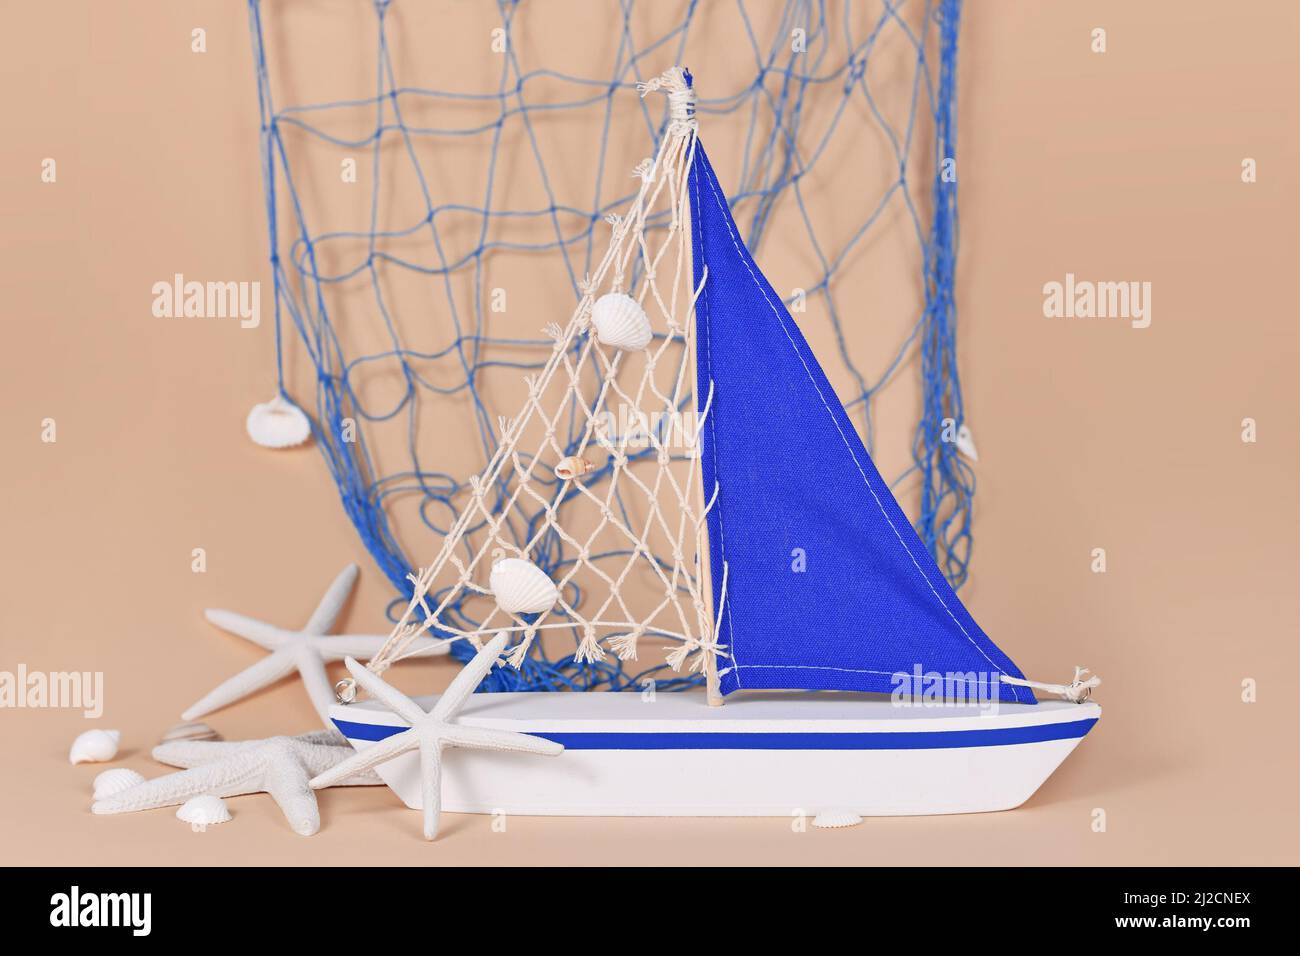 Small sailing boat decoration with starfish and fishing net Stock Photo